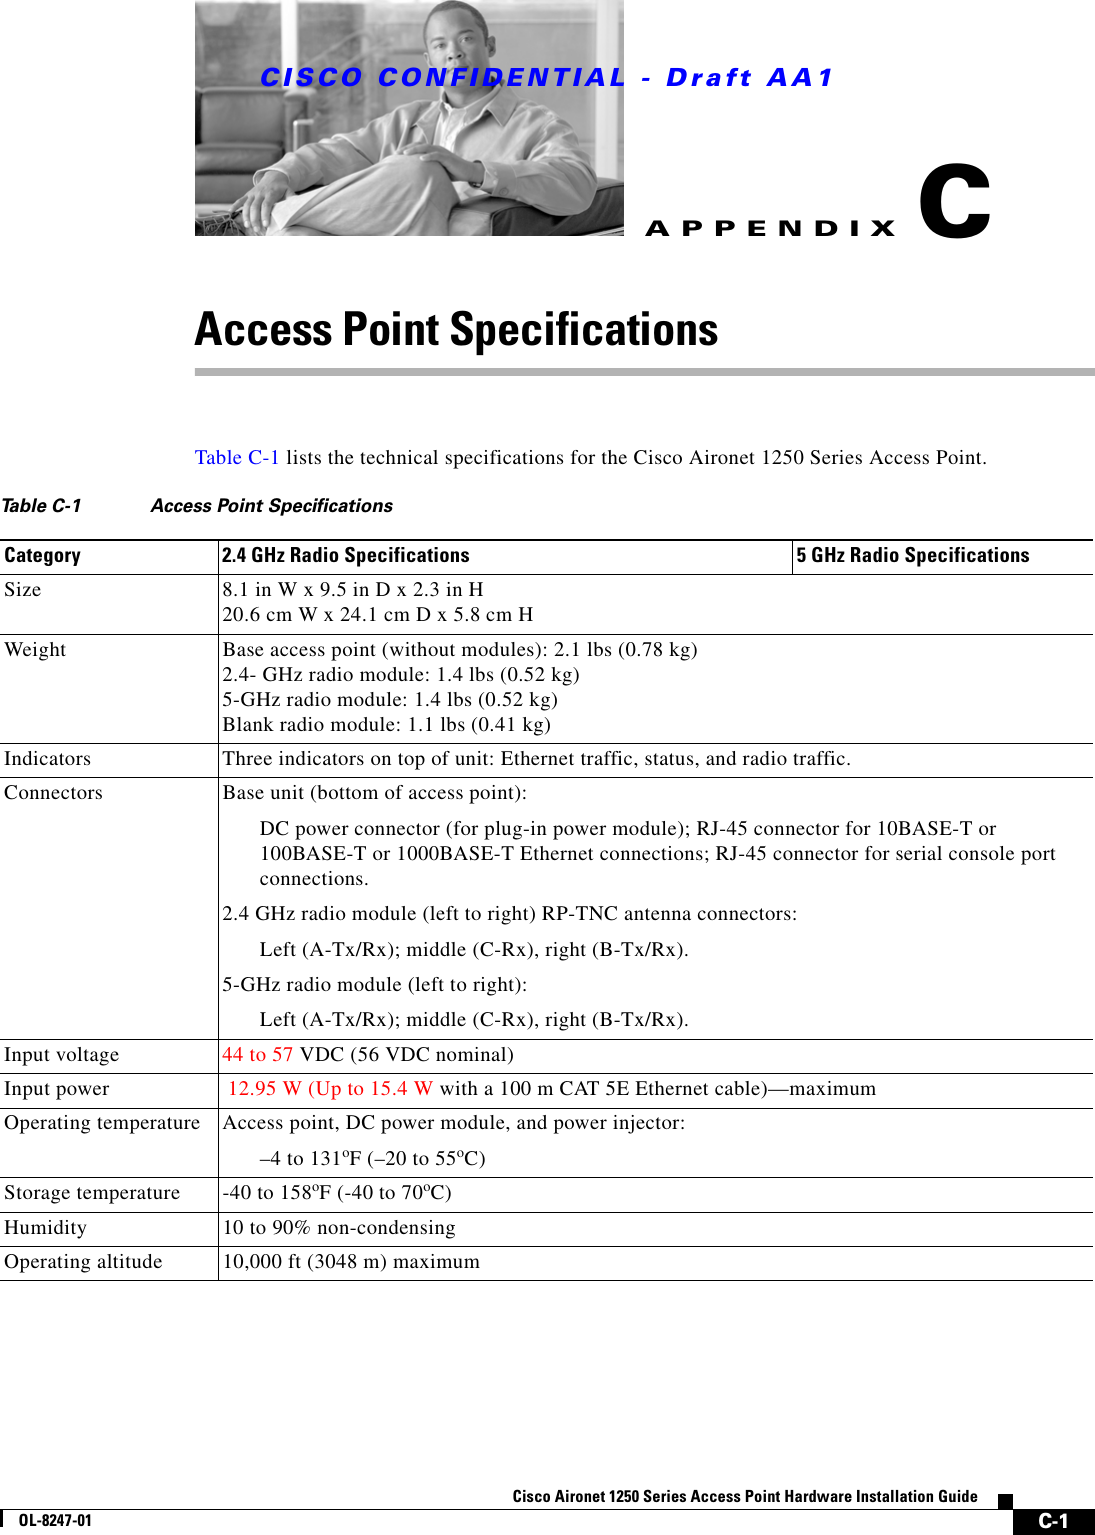 CISCO CONFIDENTIAL - Draft AA1C-1Cisco Aironet 1250 Series Access Point Hardware Installation GuideOL-8247-01APPENDIXCAccess Point Specifications Table C-1 lists the technical specifications for the Cisco Aironet 1250 Series Access Point.  Table C-1 Access Point SpecificationsCategory 2.4 GHz Radio Specifications 5 GHz Radio SpecificationsSize 8.1 in W x 9.5 in D x 2.3 in H 20.6 cm W x 24.1 cm D x 5.8 cm H Weight Base access point (without modules): 2.1 lbs (0.78 kg)2.4- GHz radio module: 1.4 lbs (0.52 kg) 5-GHz radio module: 1.4 lbs (0.52 kg) Blank radio module: 1.1 lbs (0.41 kg) Indicators Three indicators on top of unit: Ethernet traffic, status, and radio traffic.Connectors Base unit (bottom of access point):DC power connector (for plug-in power module); RJ-45 connector for 10BASE-T or 100BASE-T or 1000BASE-T Ethernet connections; RJ-45 connector for serial console port connections.2.4 GHz radio module (left to right) RP-TNC antenna connectors:Left (A-Tx/Rx); middle (C-Rx), right (B-Tx/Rx).5-GHz radio module (left to right):Left (A-Tx/Rx); middle (C-Rx), right (B-Tx/Rx).Input voltage  44 to 57 VDC (56 VDC nominal)Input power  12.95 W (Up to 15.4 W with a 100 m CAT 5E Ethernet cable)—maximumOperating temperature Access point, DC power module, and power injector:–4 to 131oF (–20 to 55oC) Storage temperature -40 to 158oF (-40 to 70oC)Humidity 10 to 90% non-condensingOperating altitude 10,000 ft (3048 m) maximum